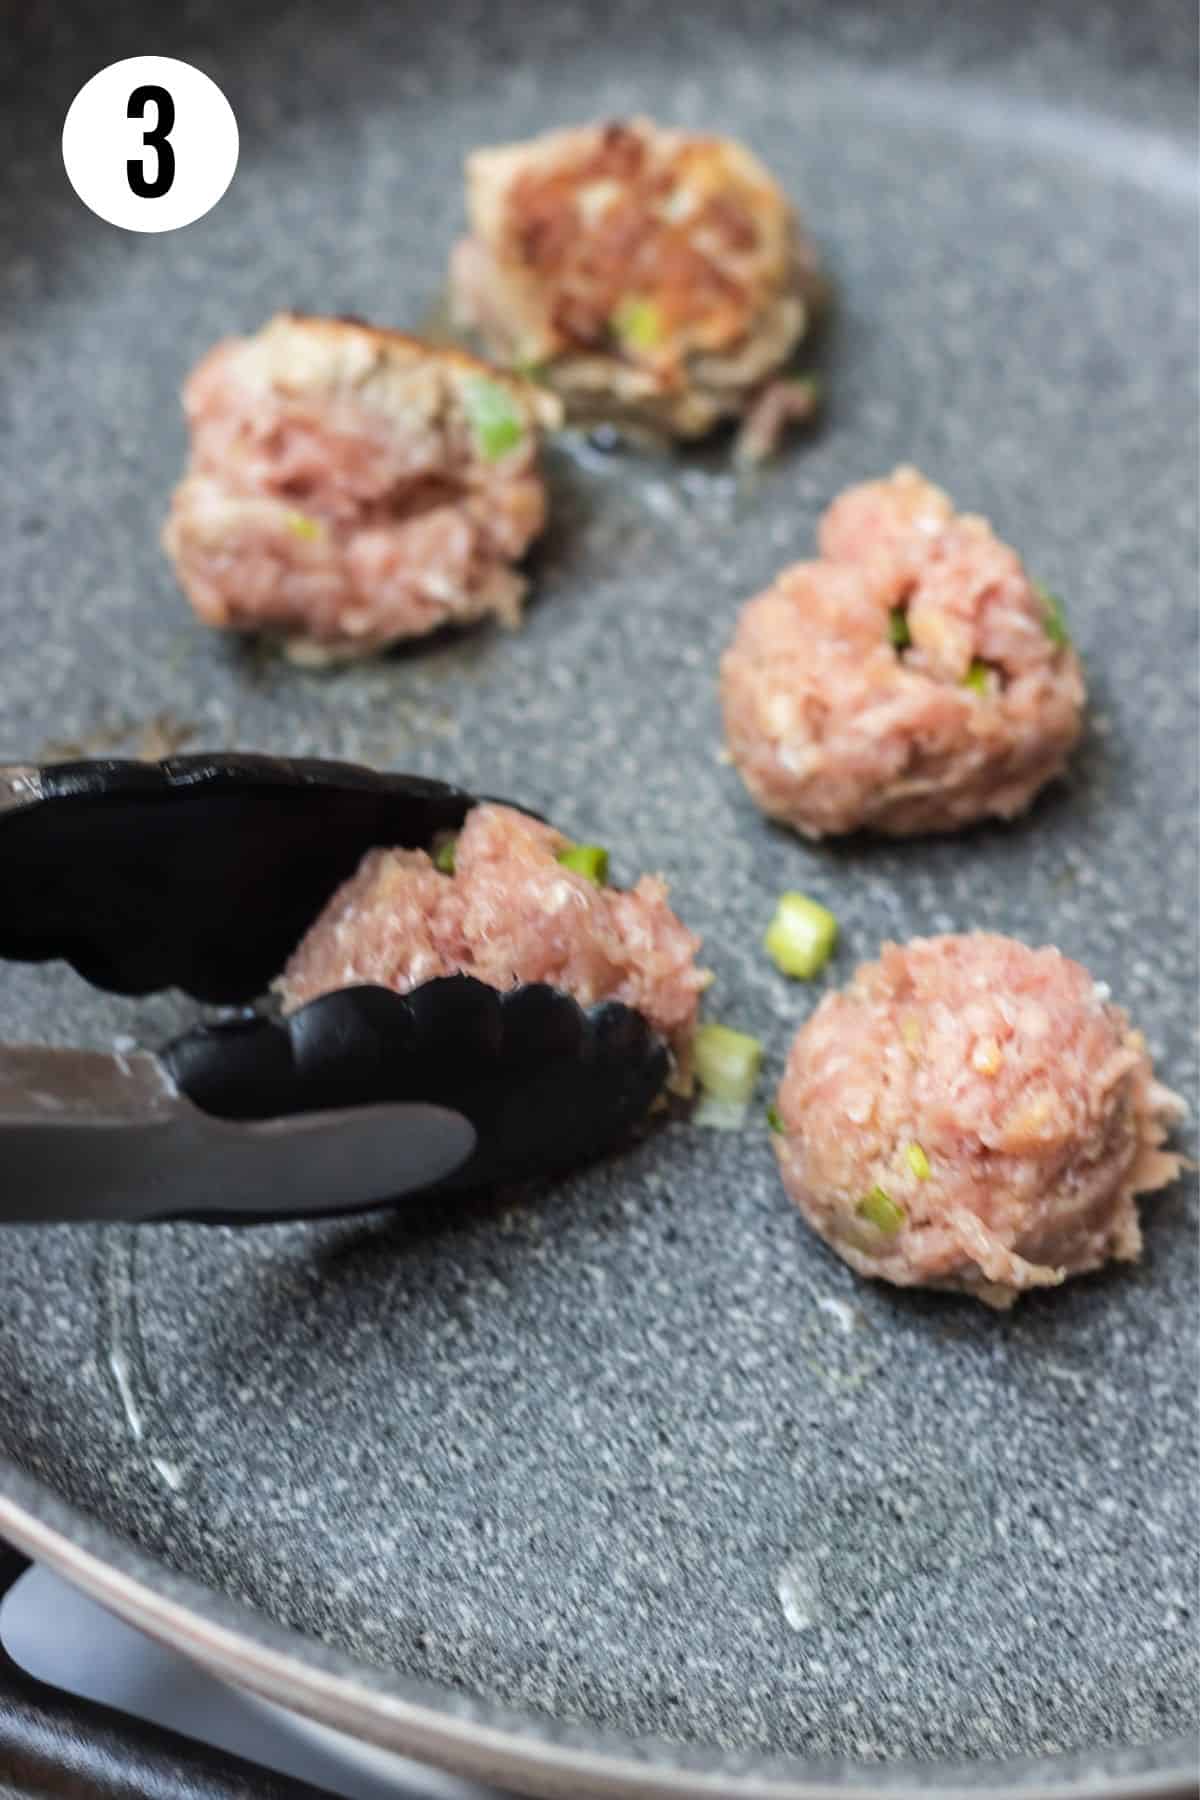 Black tongs turning meatball in a grey skillet with additional meatballs cooking. 